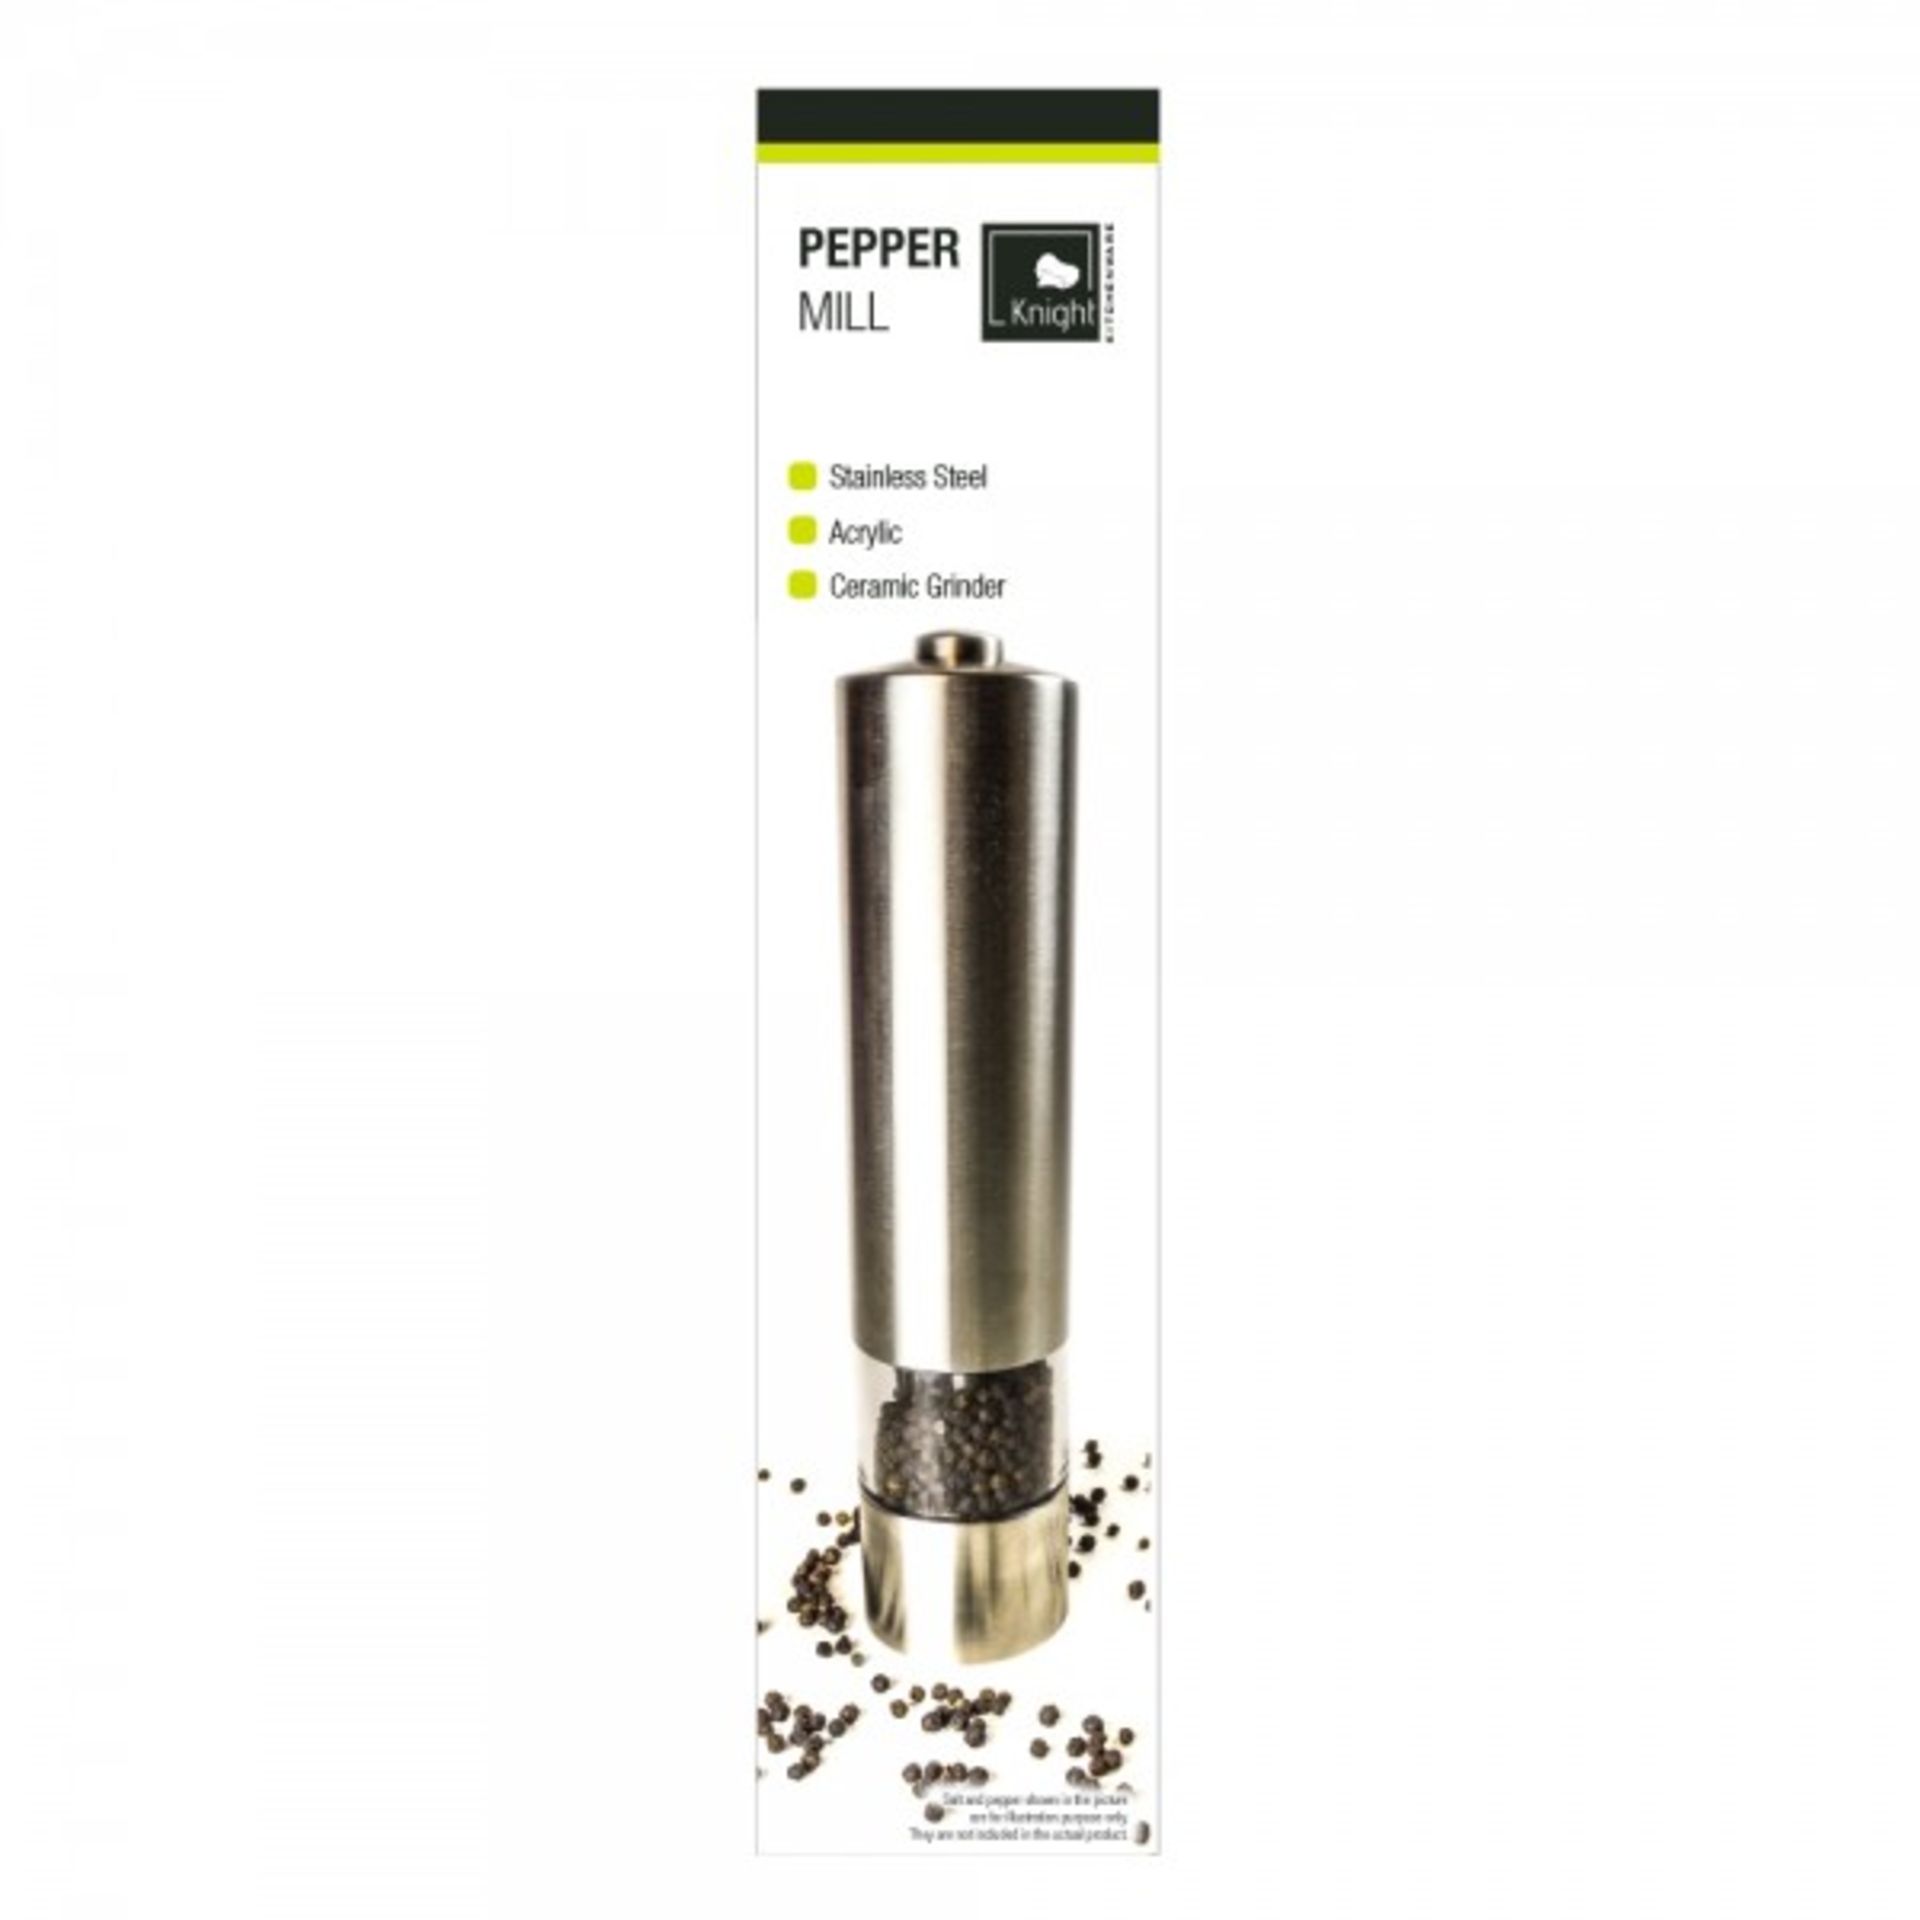 V Brand New Electric Stainless Steel Pepper Mill ISP £14.99 (Coopers Of Stortford) X 2 YOUR BID